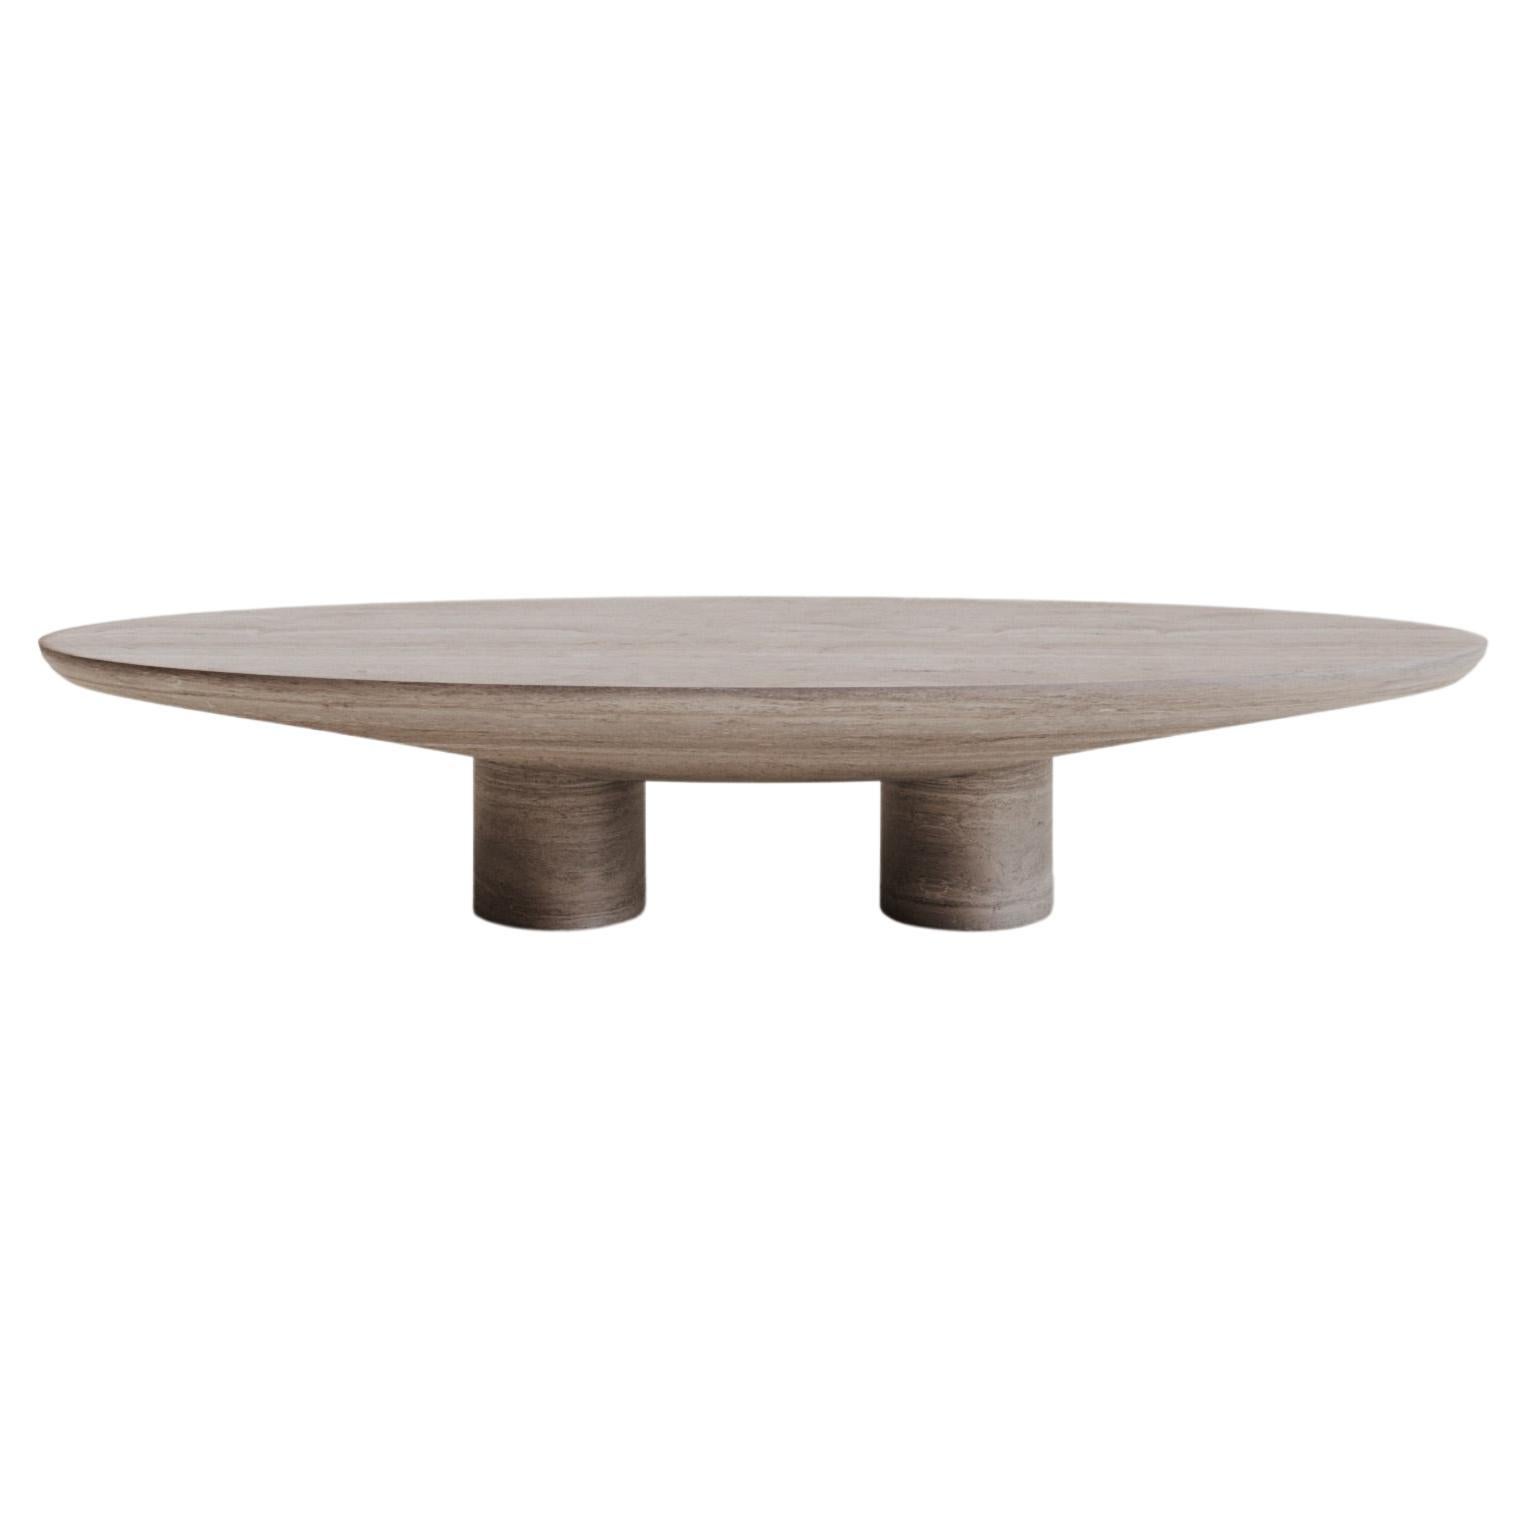 Solid Silver Travertine Oval Coffee Table 160 by Studio Narra